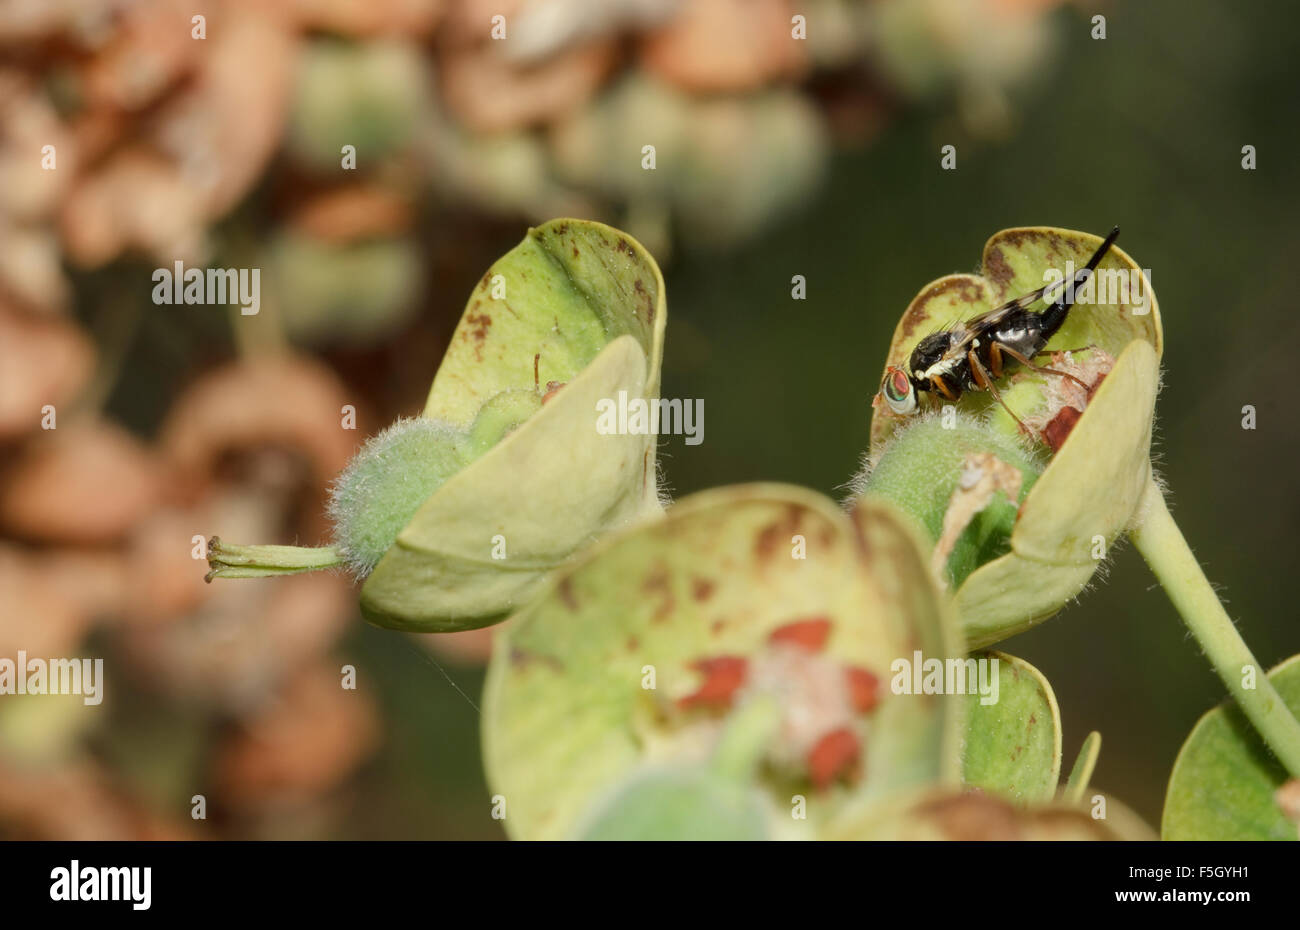 Closeup photo of a fruit fly (Tephritidae family) insect resting on a plant's stem Stock Photo